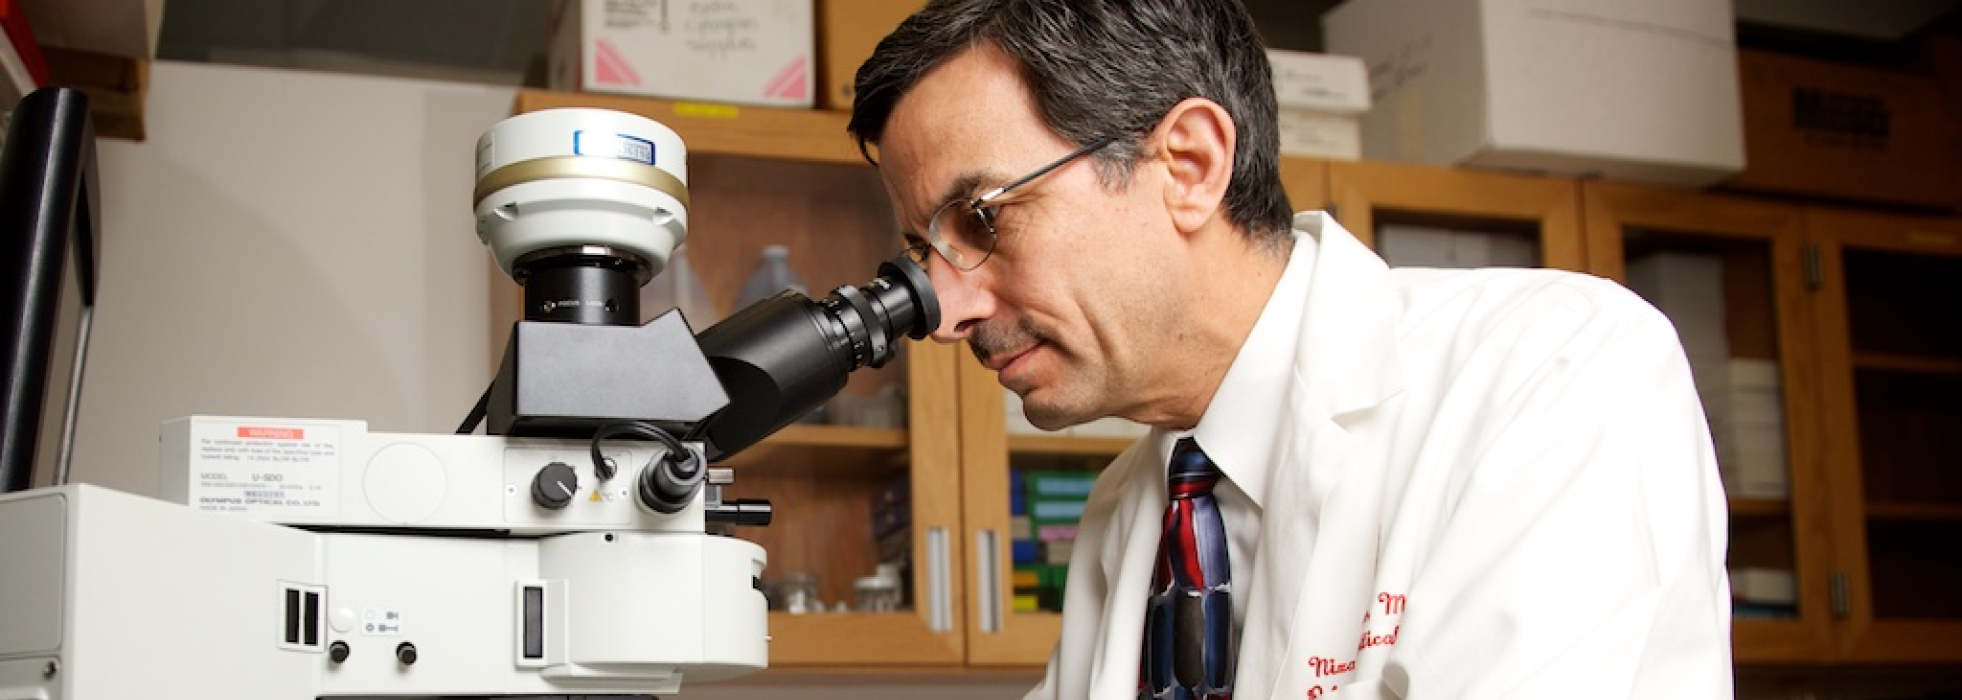 Nizar Jarjour, MD, wearing a white lab coat and looking into a microscope